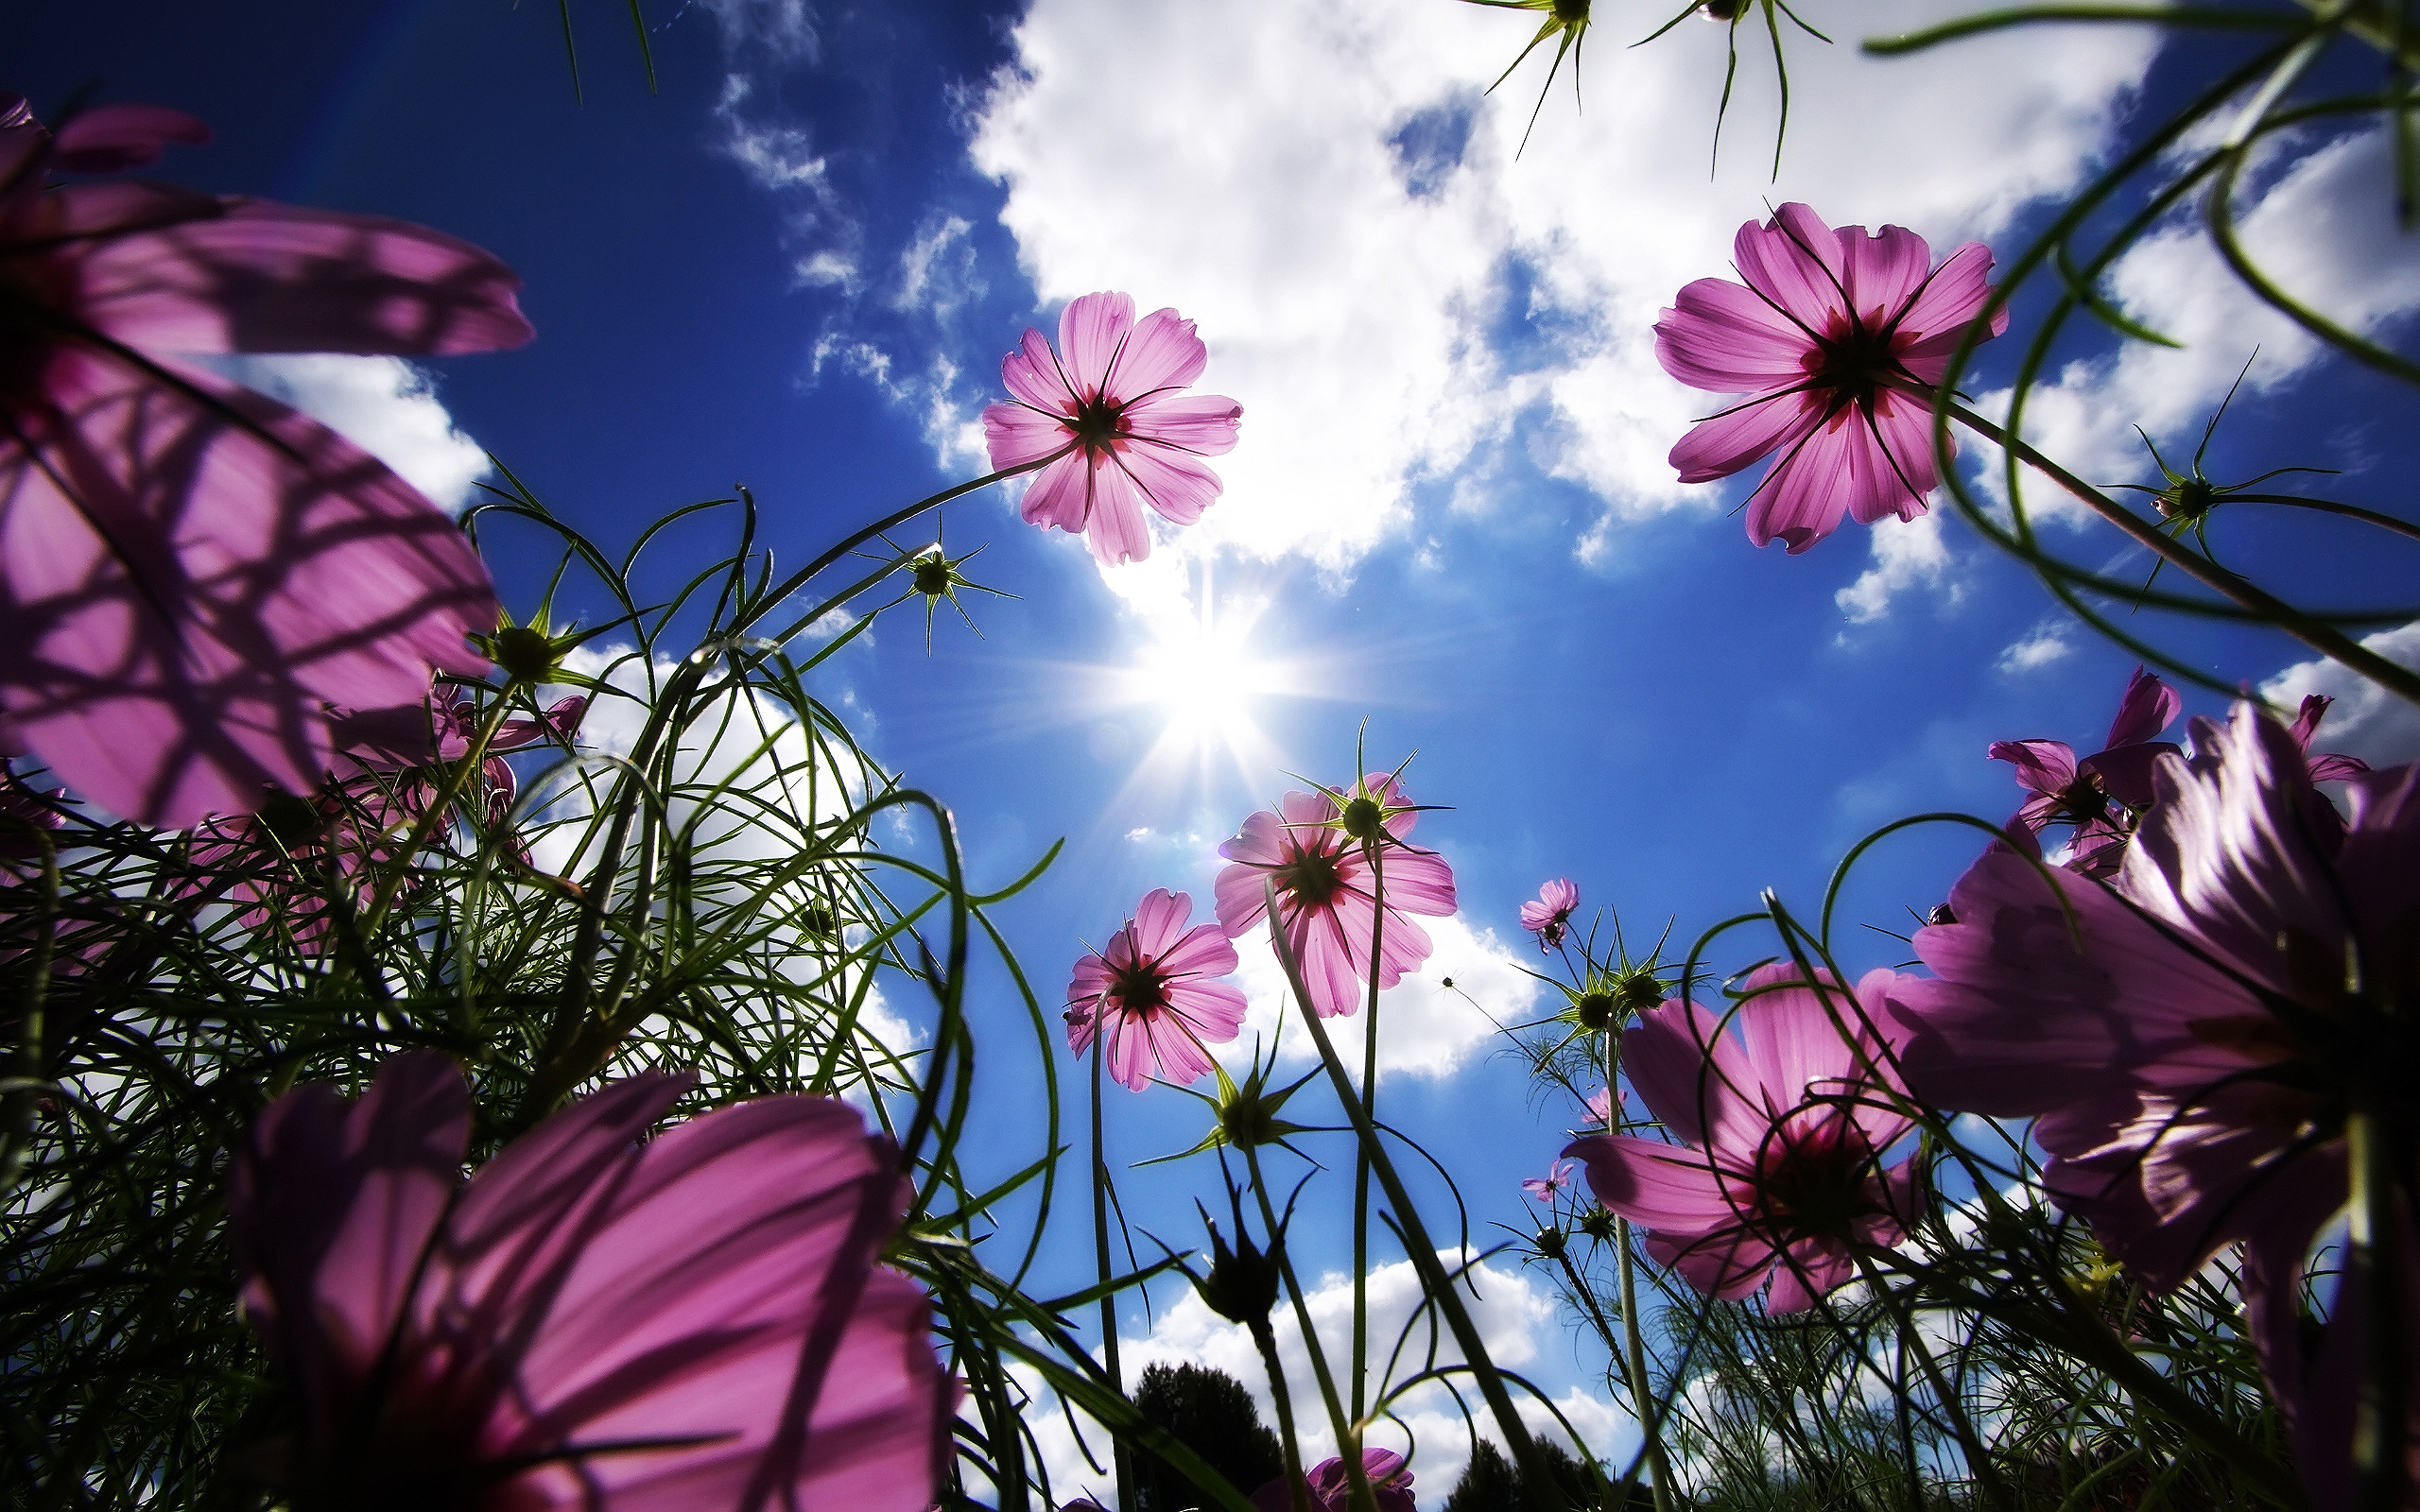 Flowers Nature Pink Flowers Worms Eye View Sun Cosmos Flower Clouds Bottom View 2560x1600